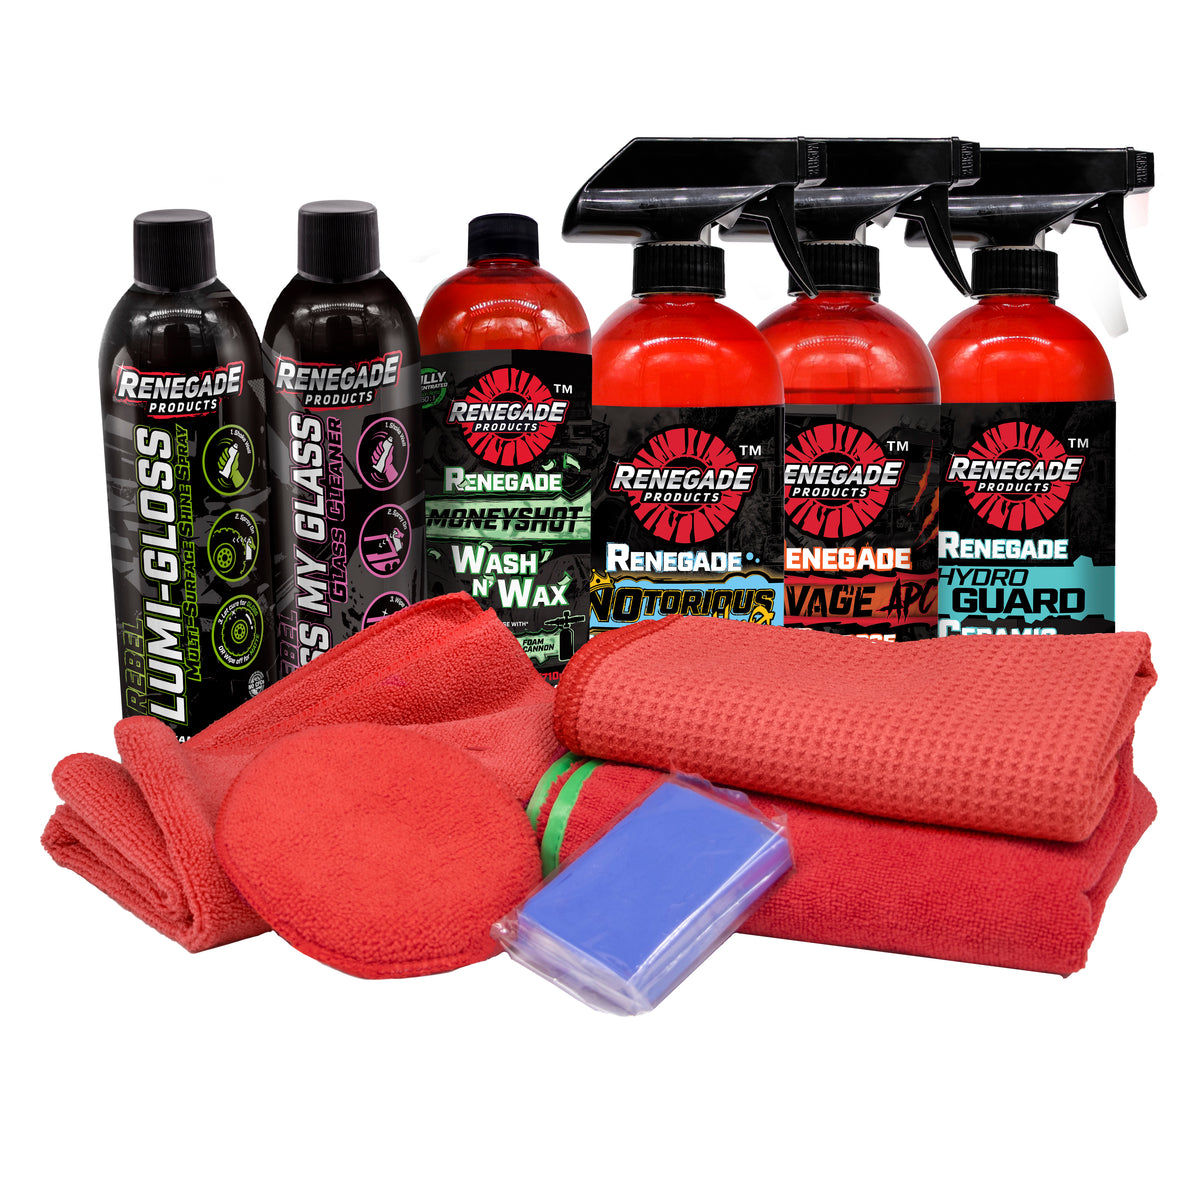 Assortment of included items in the Renegade Products USA Cars &amp; Coffee Detailing Kit, spread out to showcase each product. The kit contains various specialized cleaners, waxes, polishes, and applicators, all designed to provide a comprehensive detailing experience for vehicle enthusiasts. Everything you need for a professional-level cleaning, presented neatly and attractively.